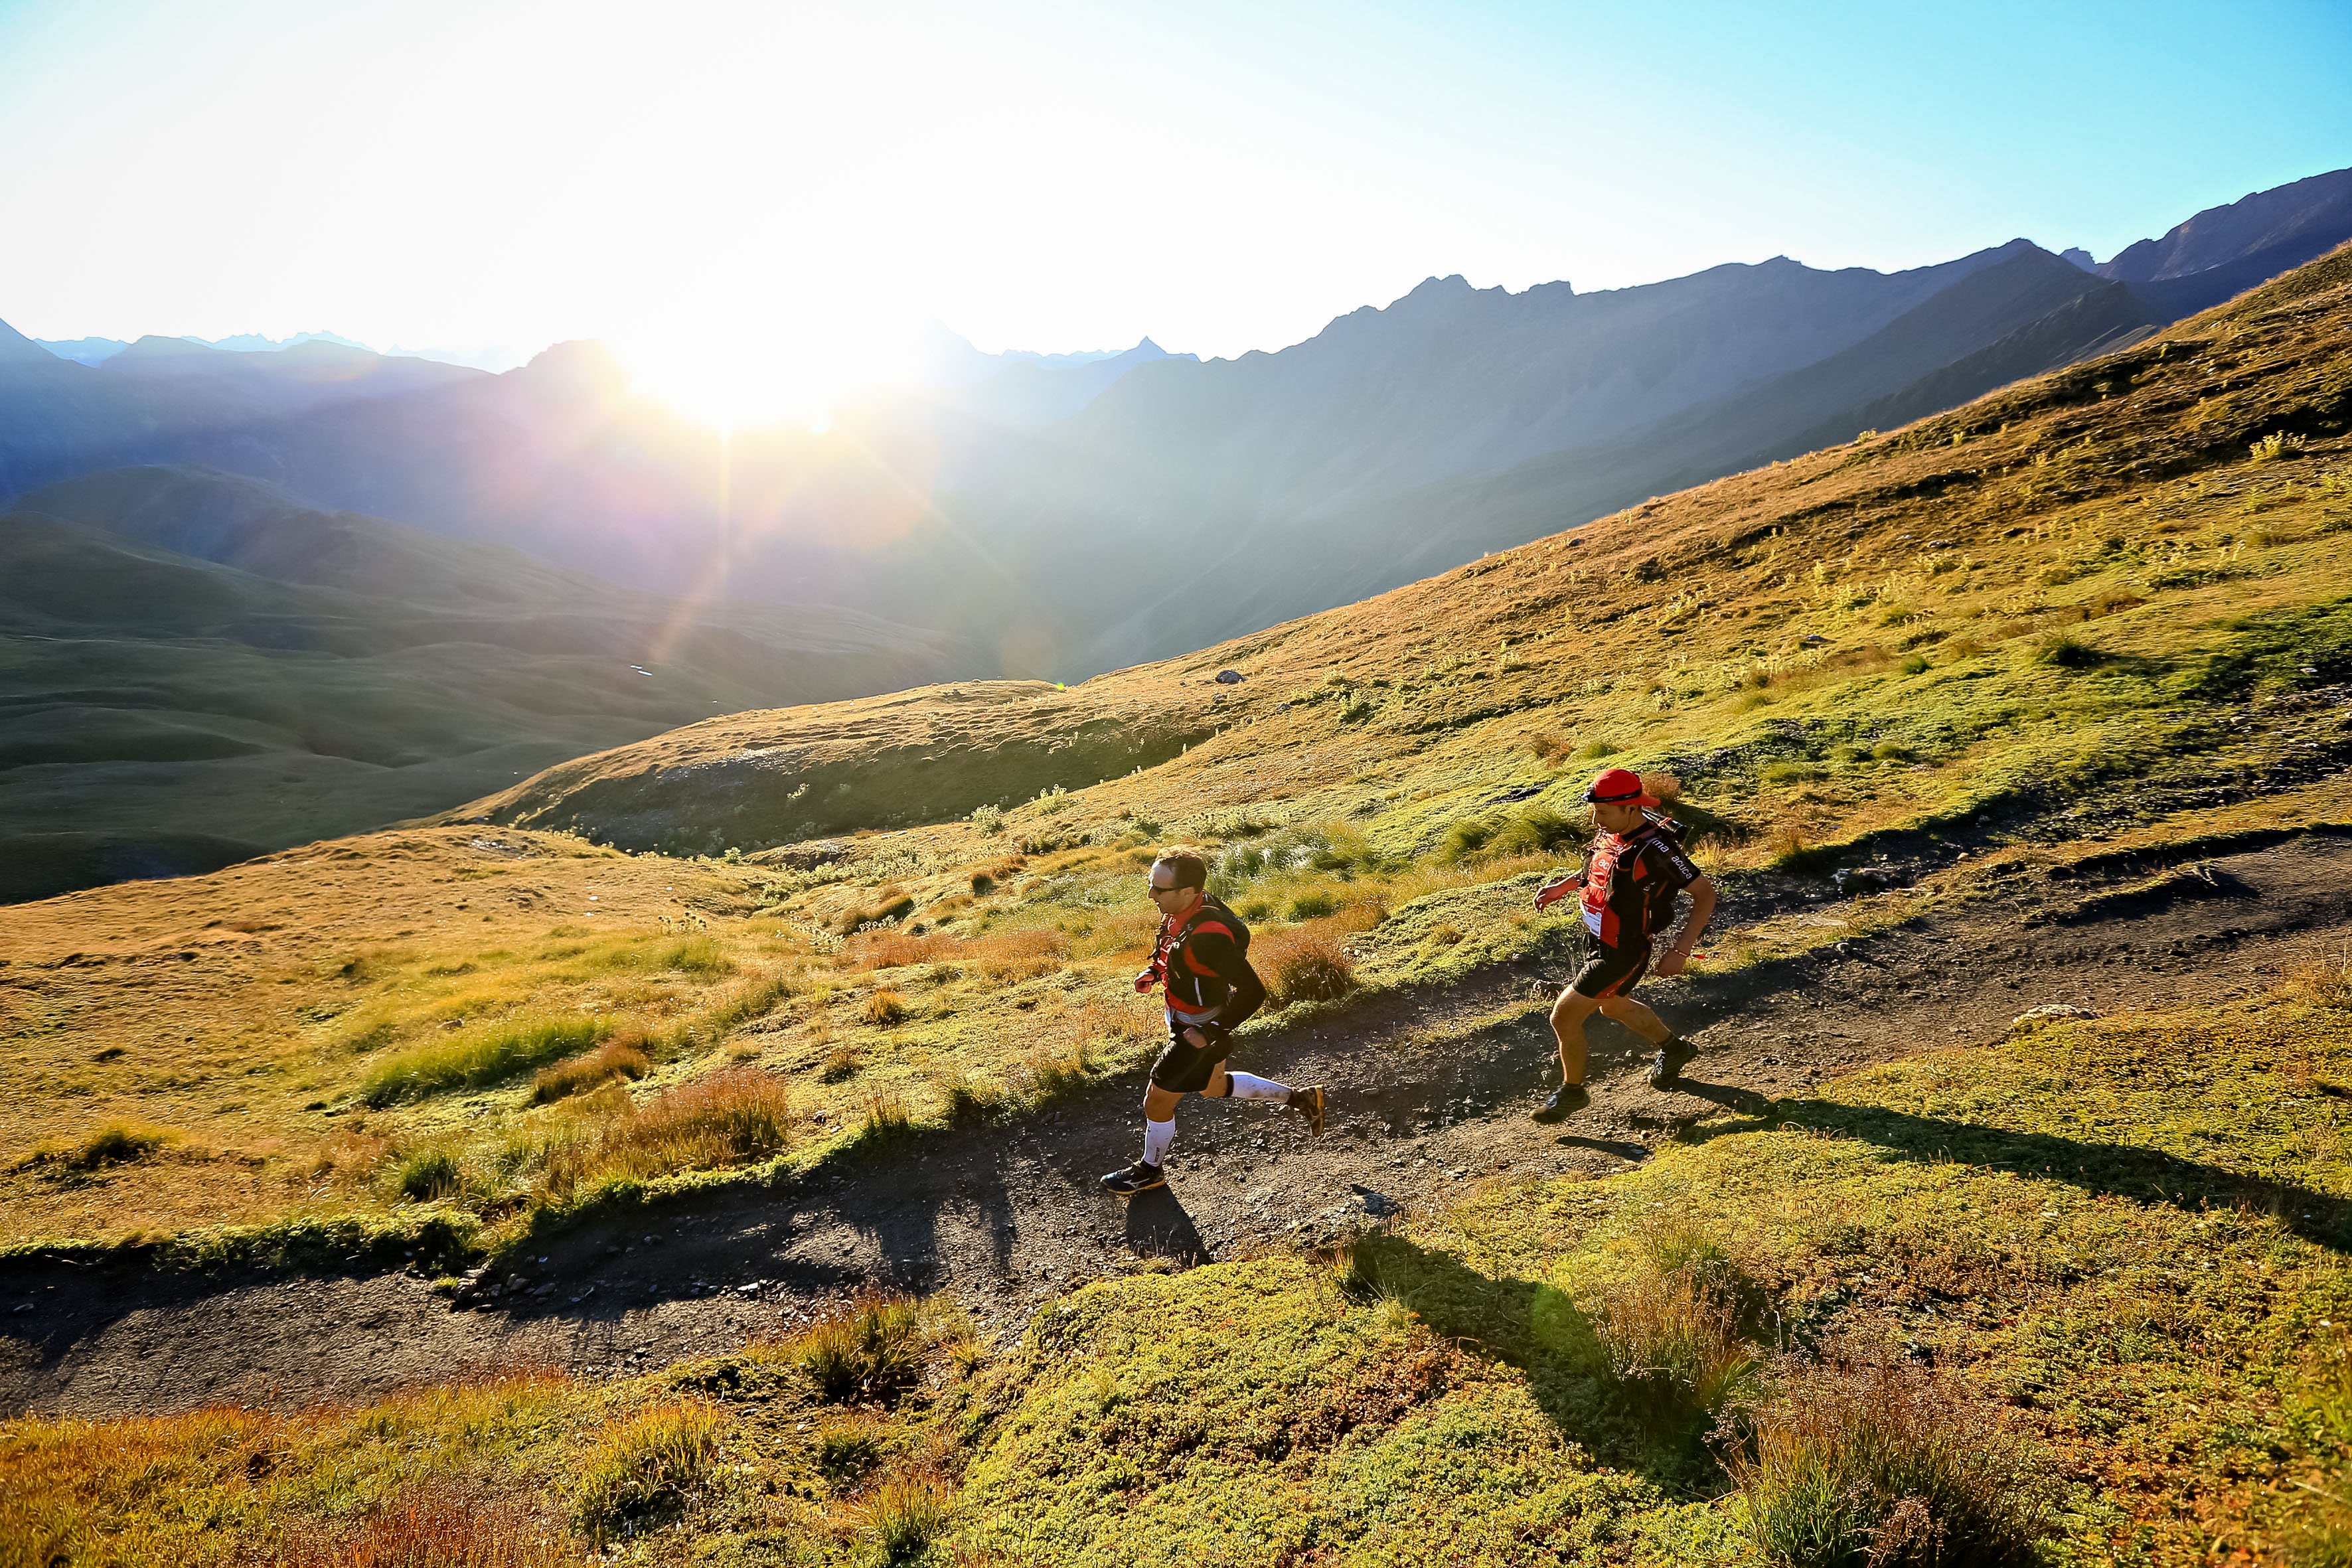 Trail runners in front of sun in the mountains